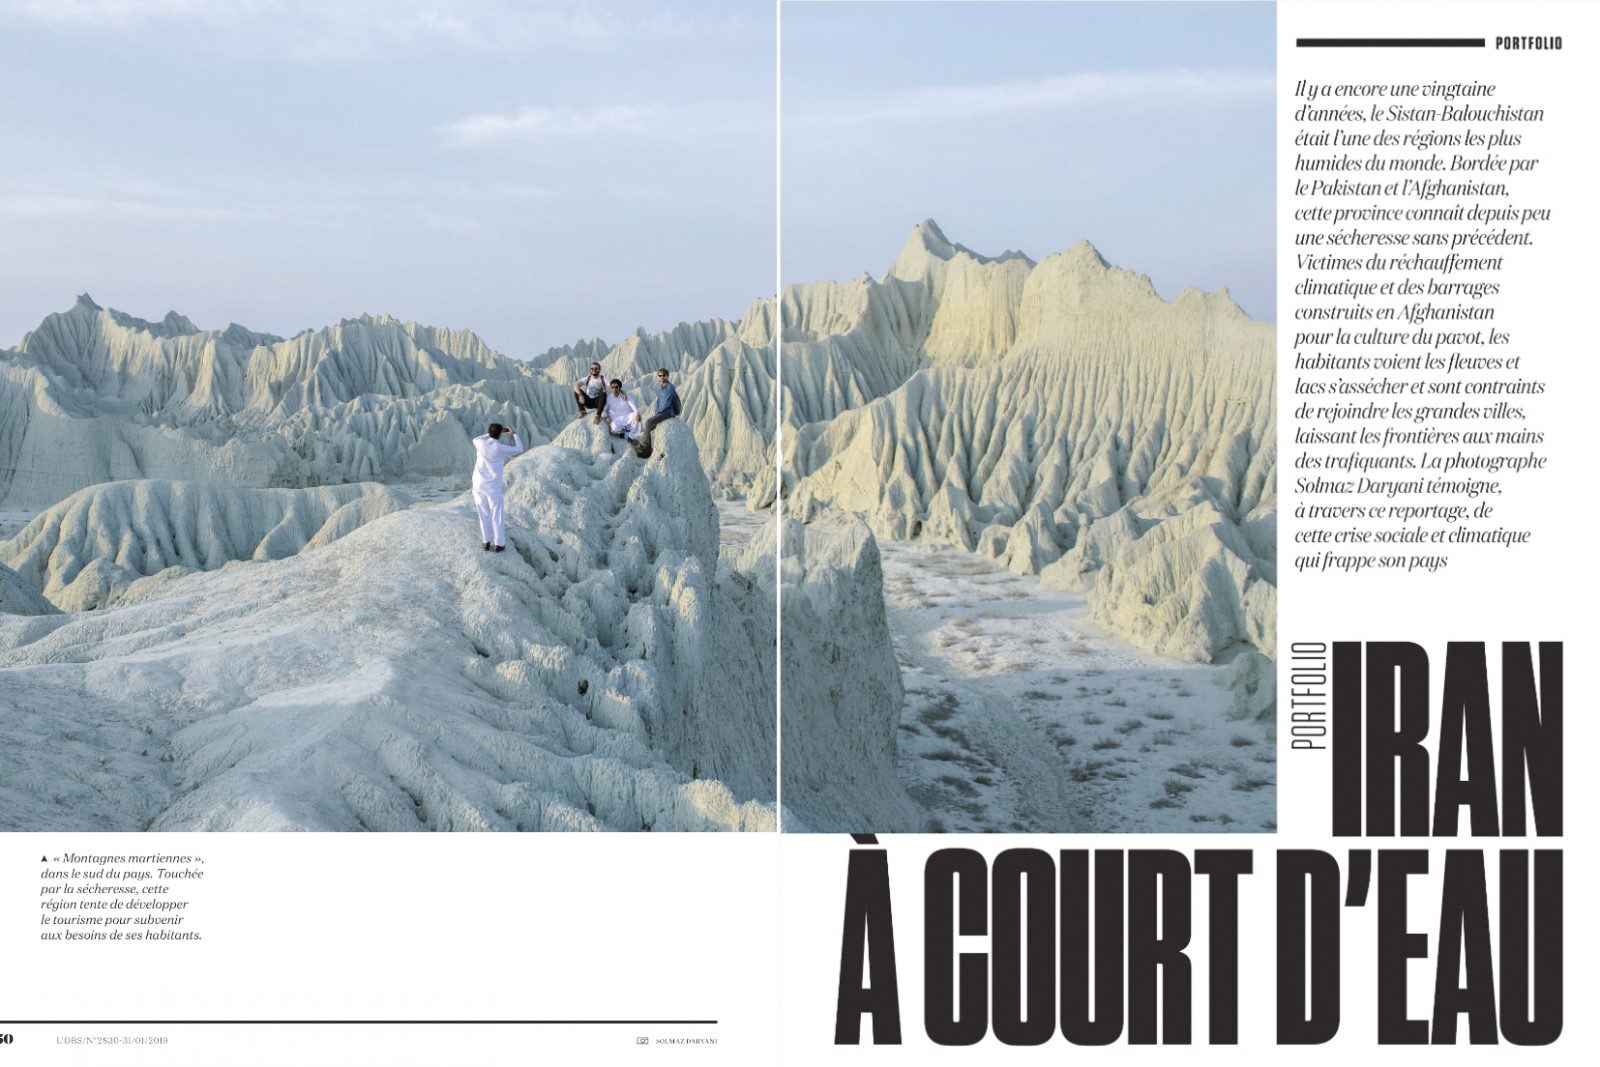 Thumbnail of In The Desert of Iran's Wetlands published in L'OBS Magazine